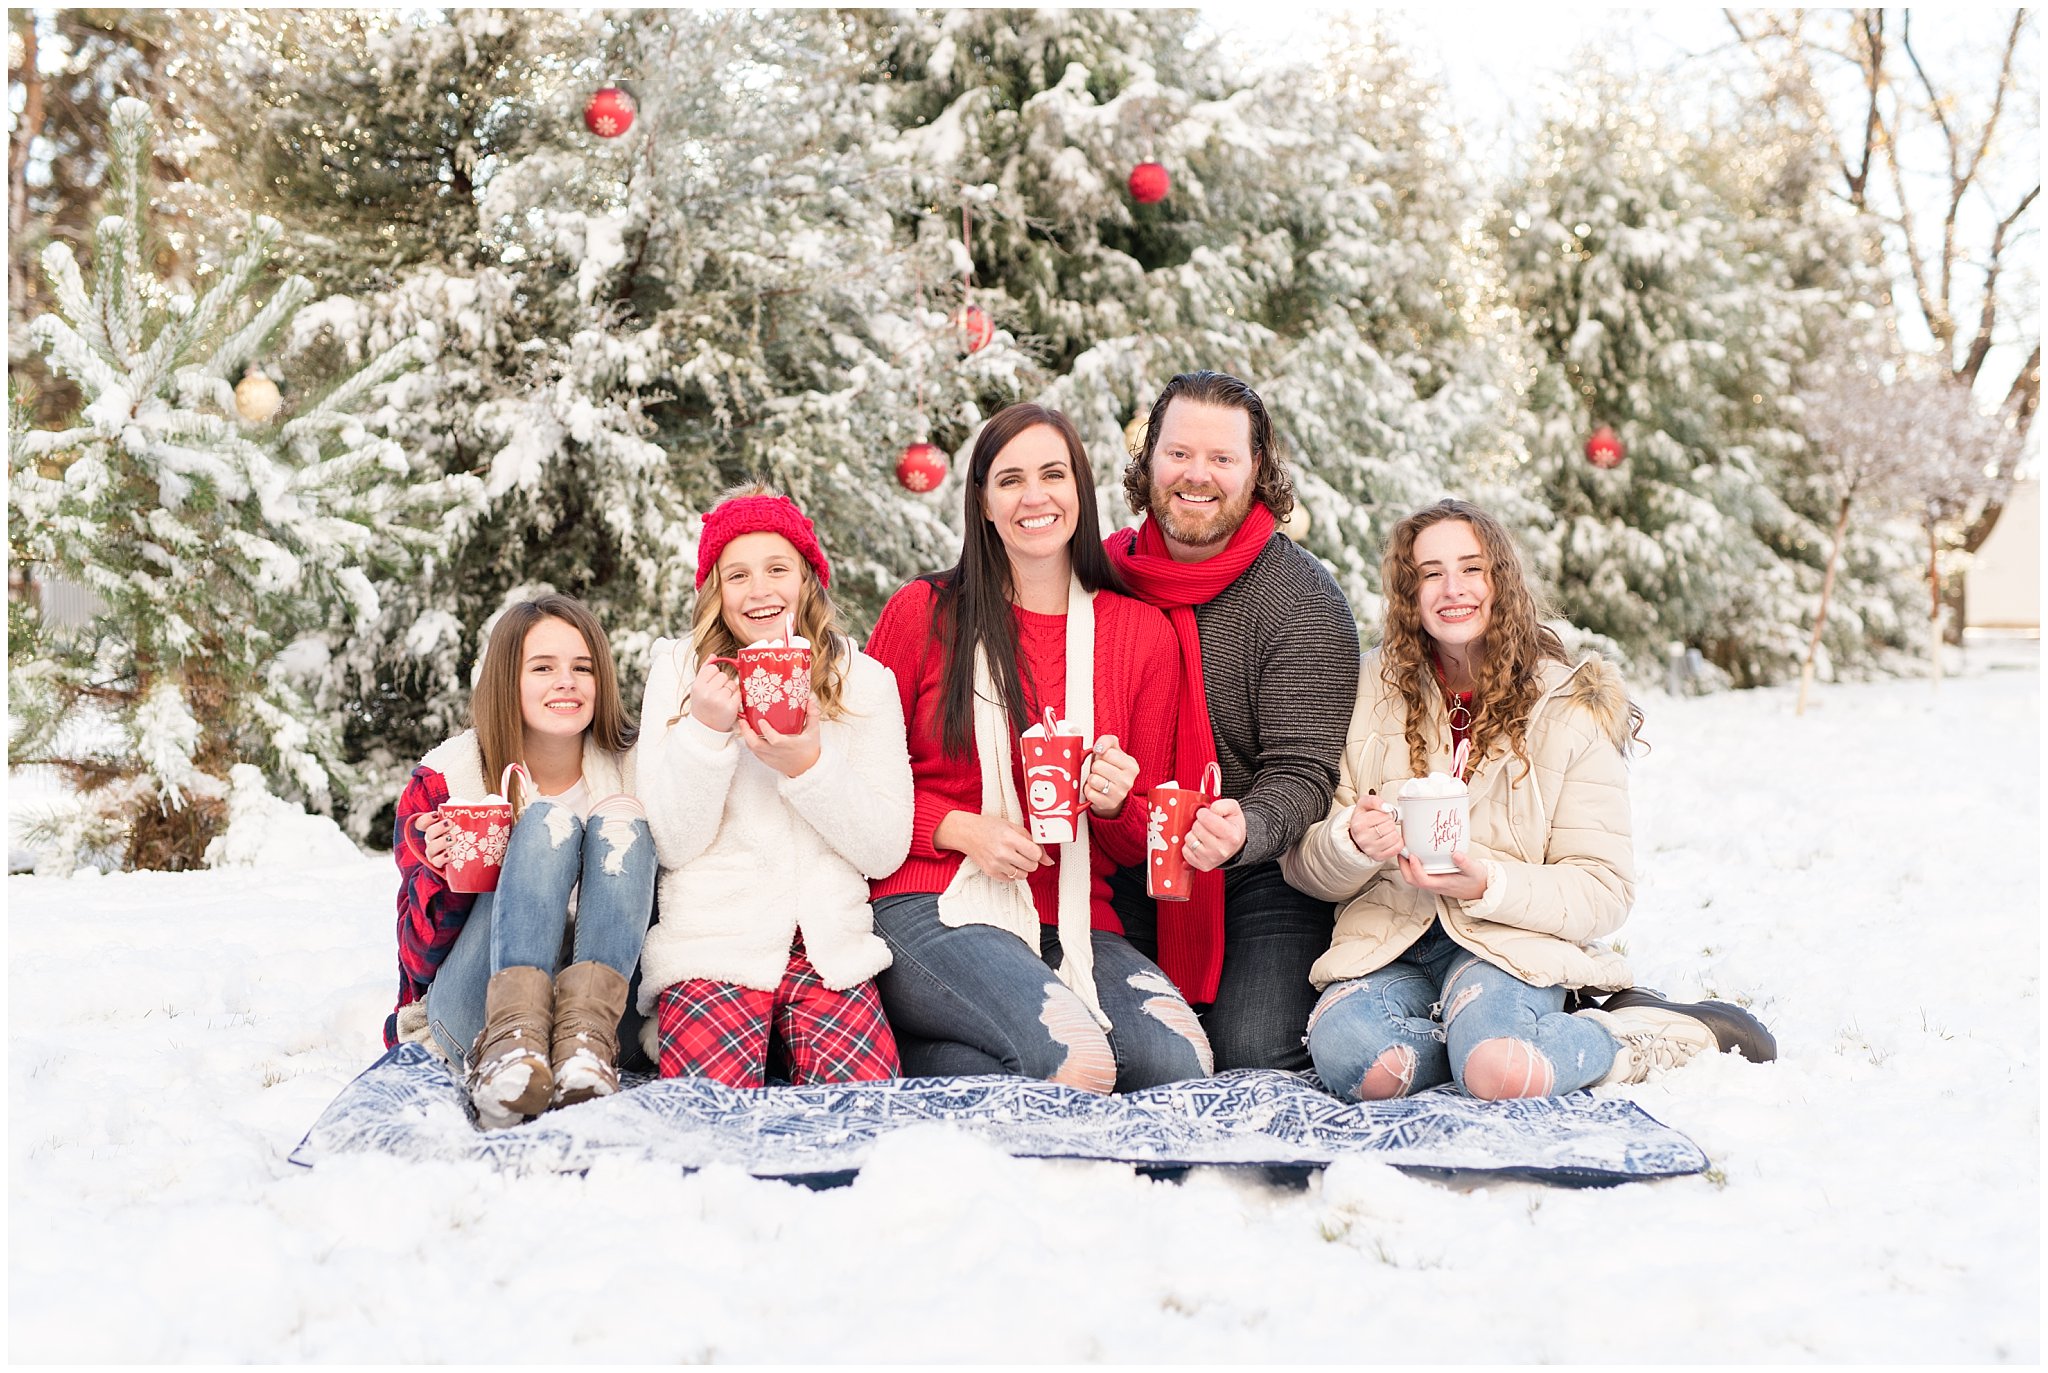 Family with hot chocolate mugs in front of Christmas trees in the snow | Utah Family Christmas Photoshoot | Oak Hills Reception and Event | Jessie and Dallin Photography